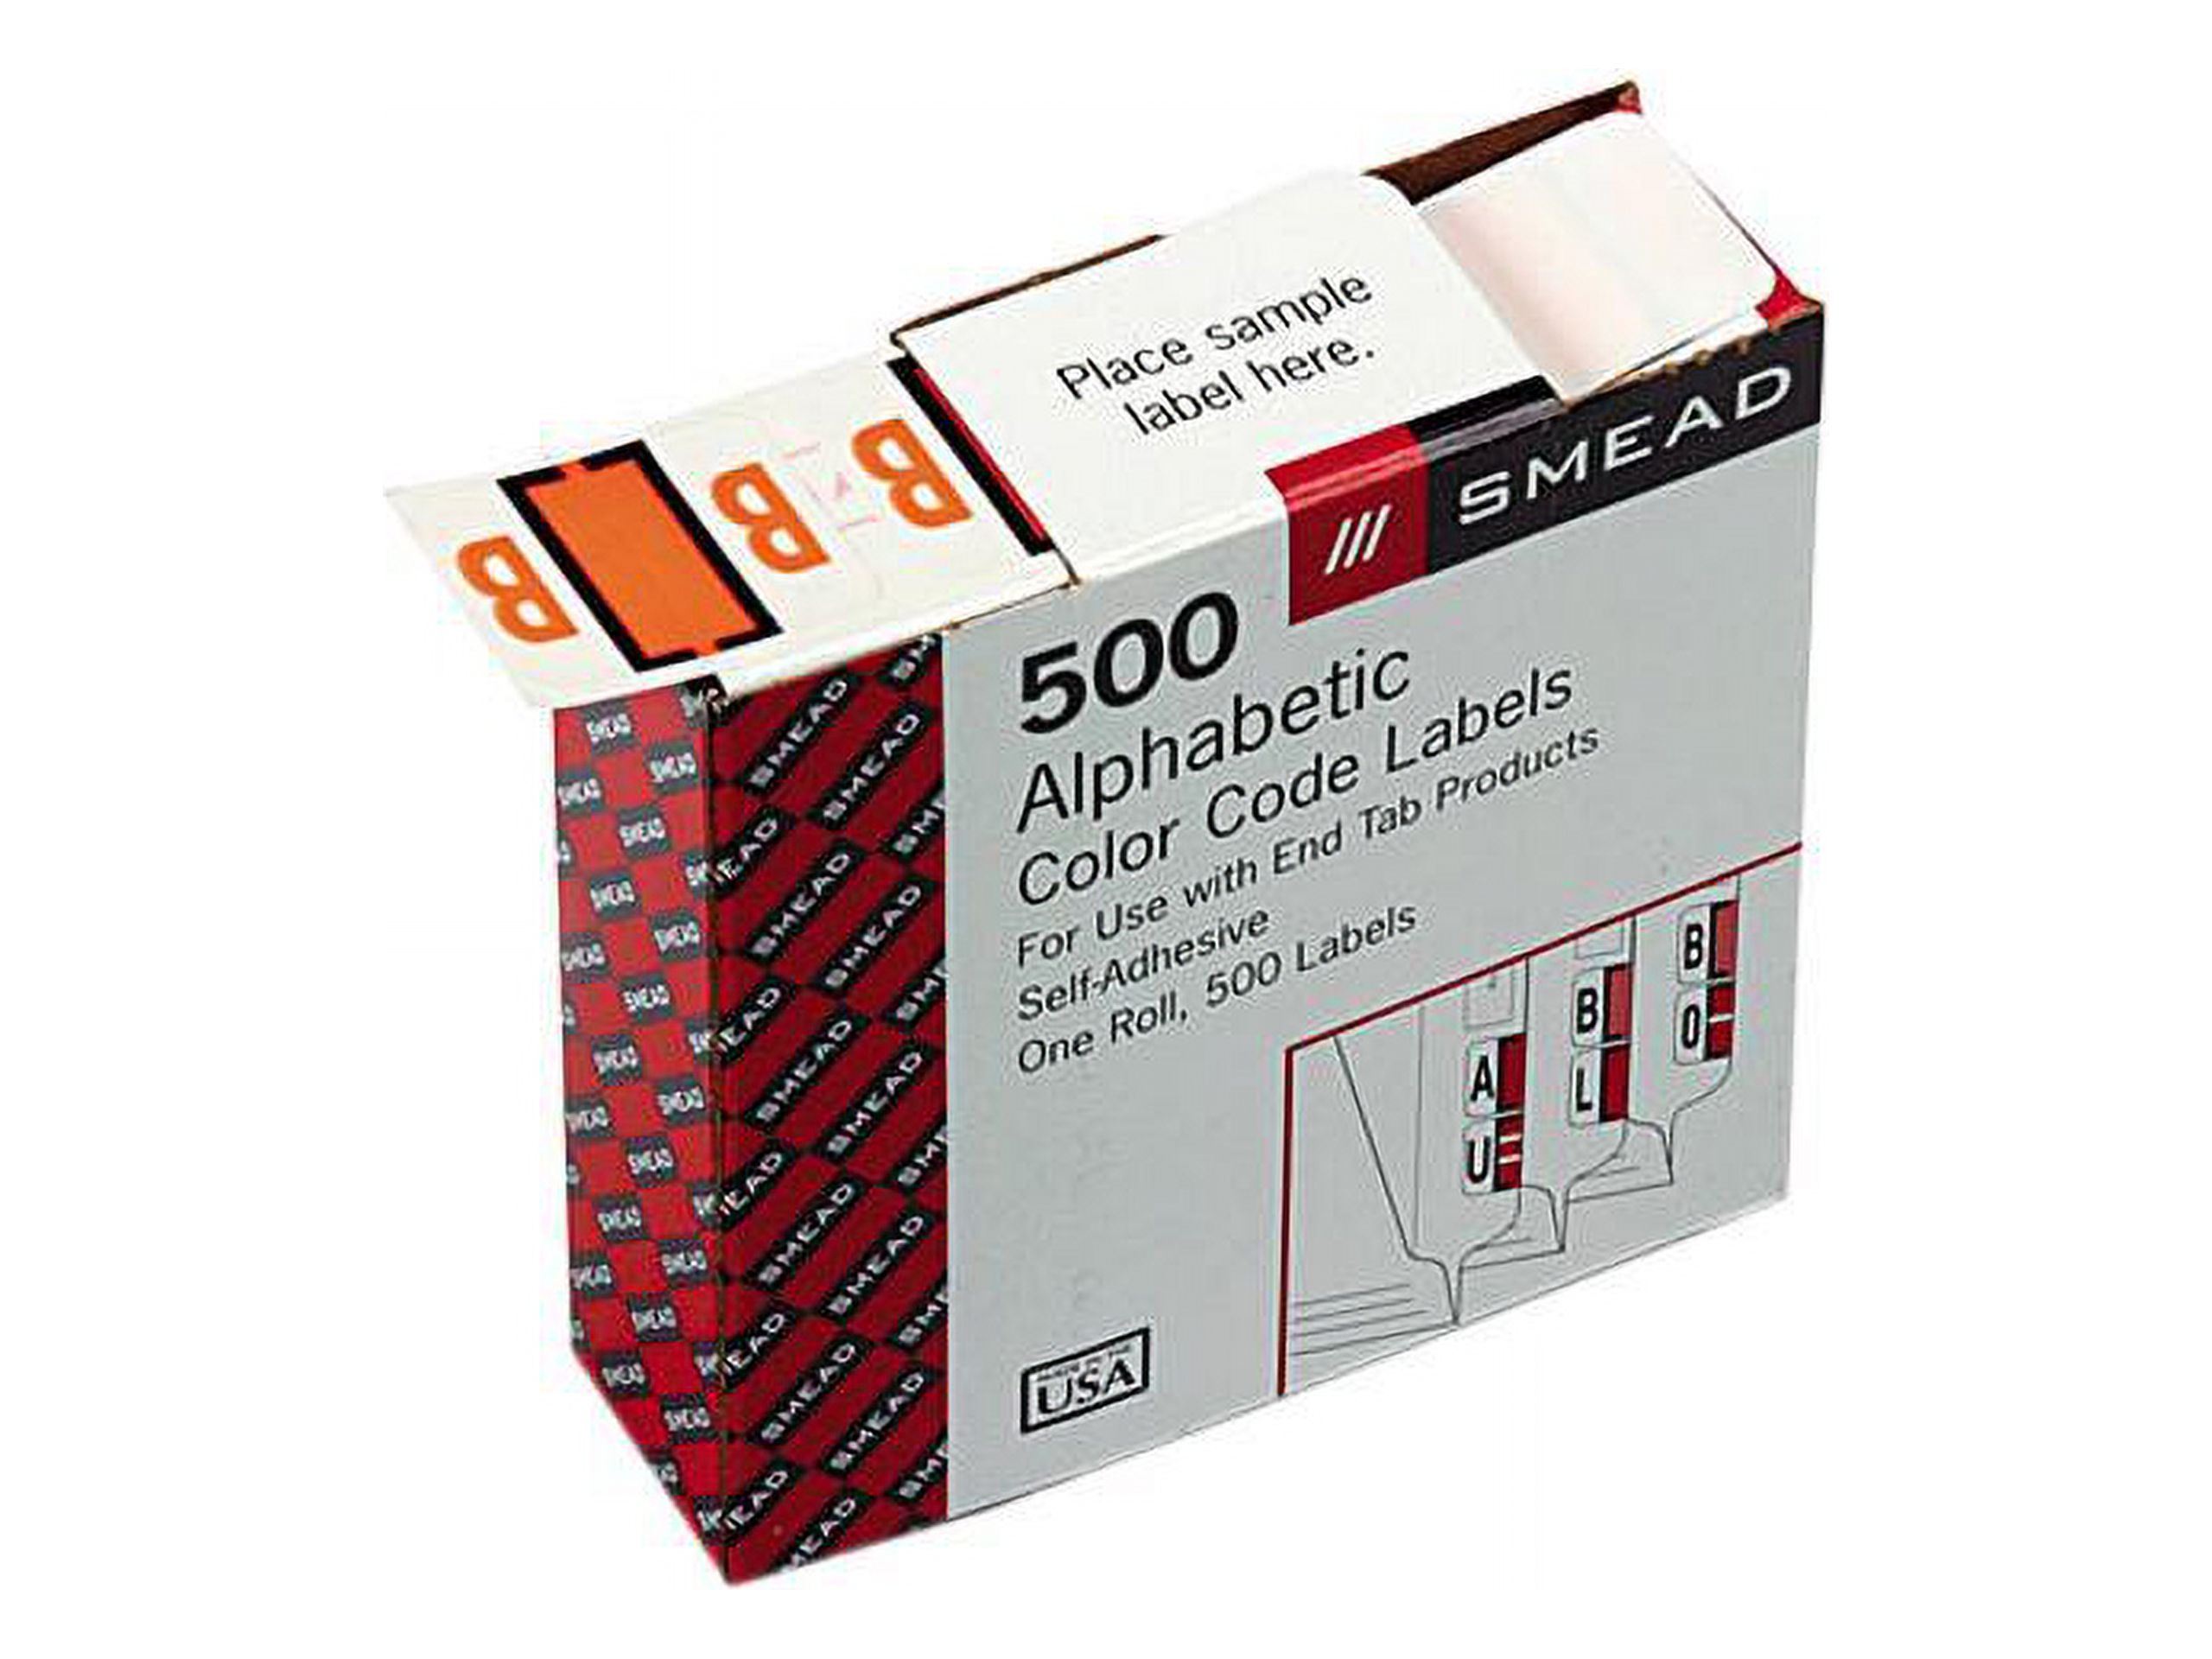 Smead 67072 A-Z Color-Coded Bar-Style End Tab Labels, Letter B, Light Orange, 500/Roll - image 1 of 3